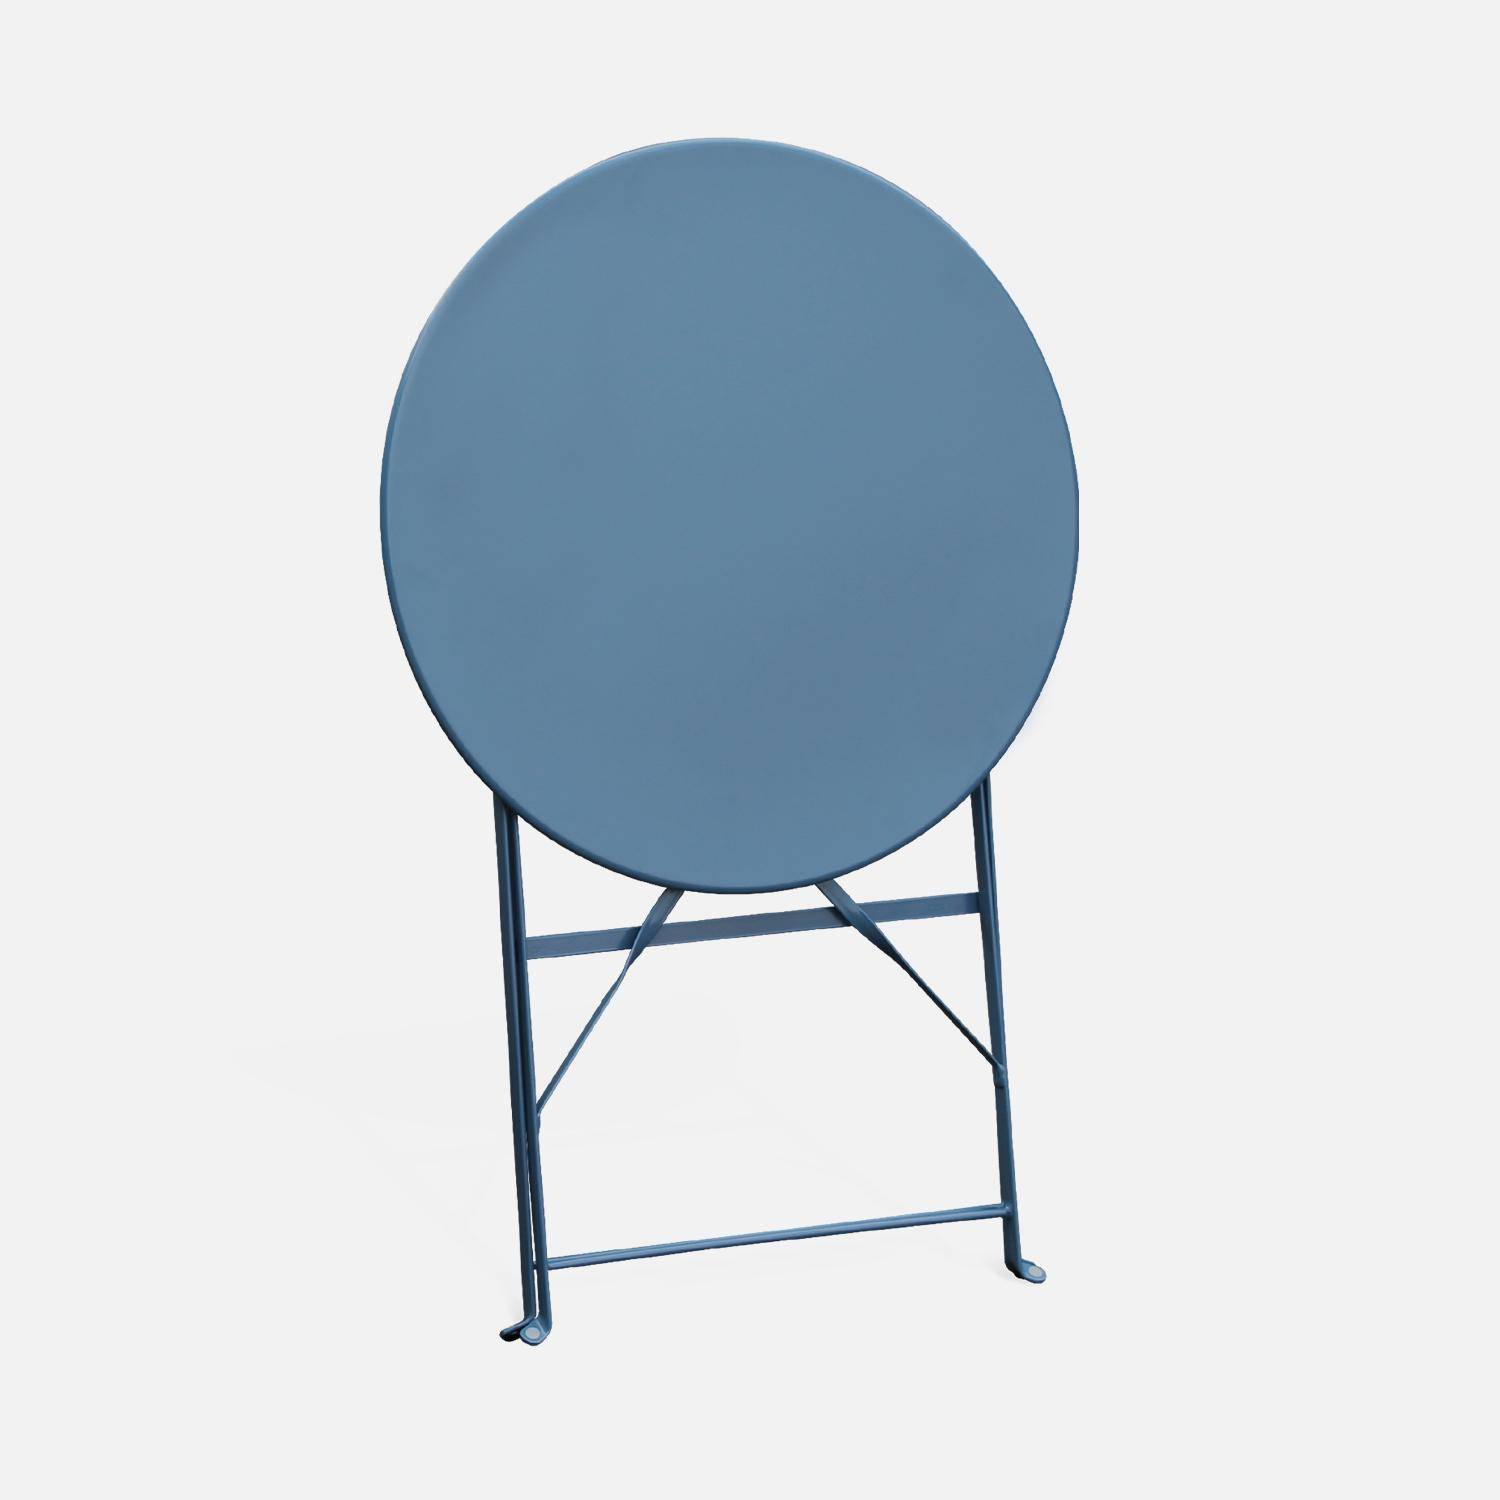 Foldable bistro garden table - Round Emilia grey blue - Round table Ø60cm, thermo-lacquered steel,sweeek,Photo5